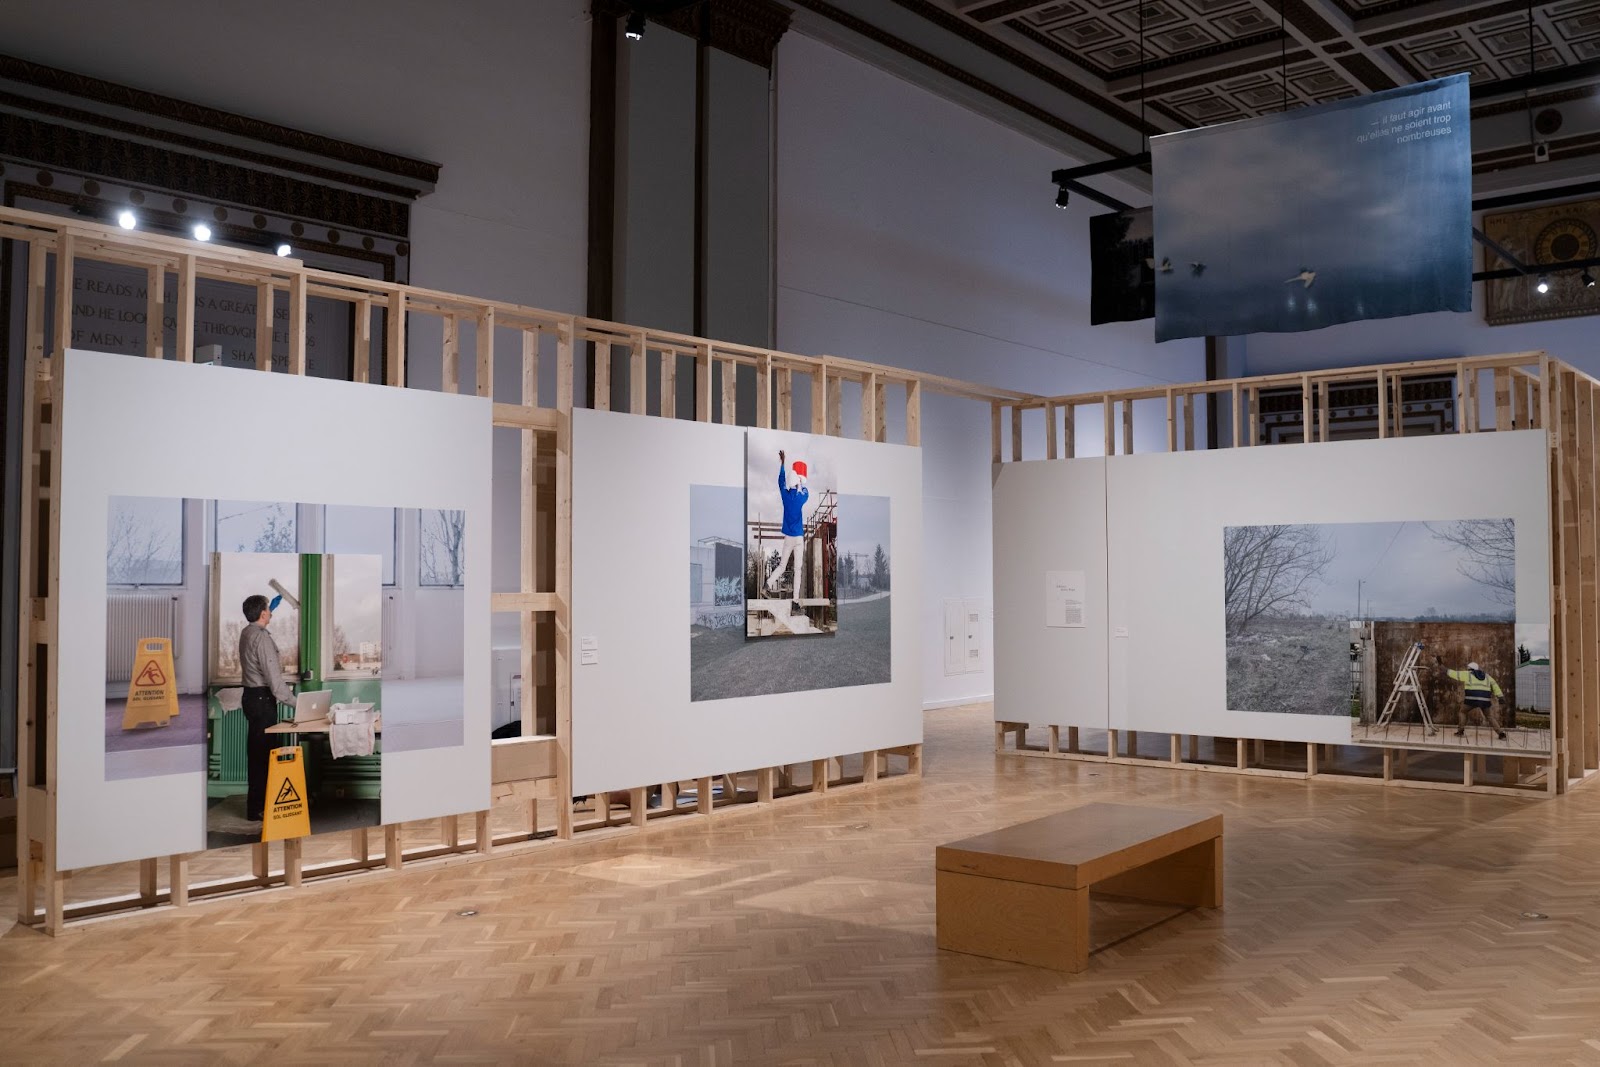 Image: Installation view of three of Güiza-Rojas’ pieces from Territoire-Travail (2018). From left to right, one is a picture of a man performing janitorial work inside a building with one hand and working on a laptop with the other; the second is a man in a construction hat at a construction site, staged to look like he is working on a red lamp as an electrician; the third is a man in a neon construction vest and hat holding a large microphone up to a ladder. Courtesy of Villa Albertine.